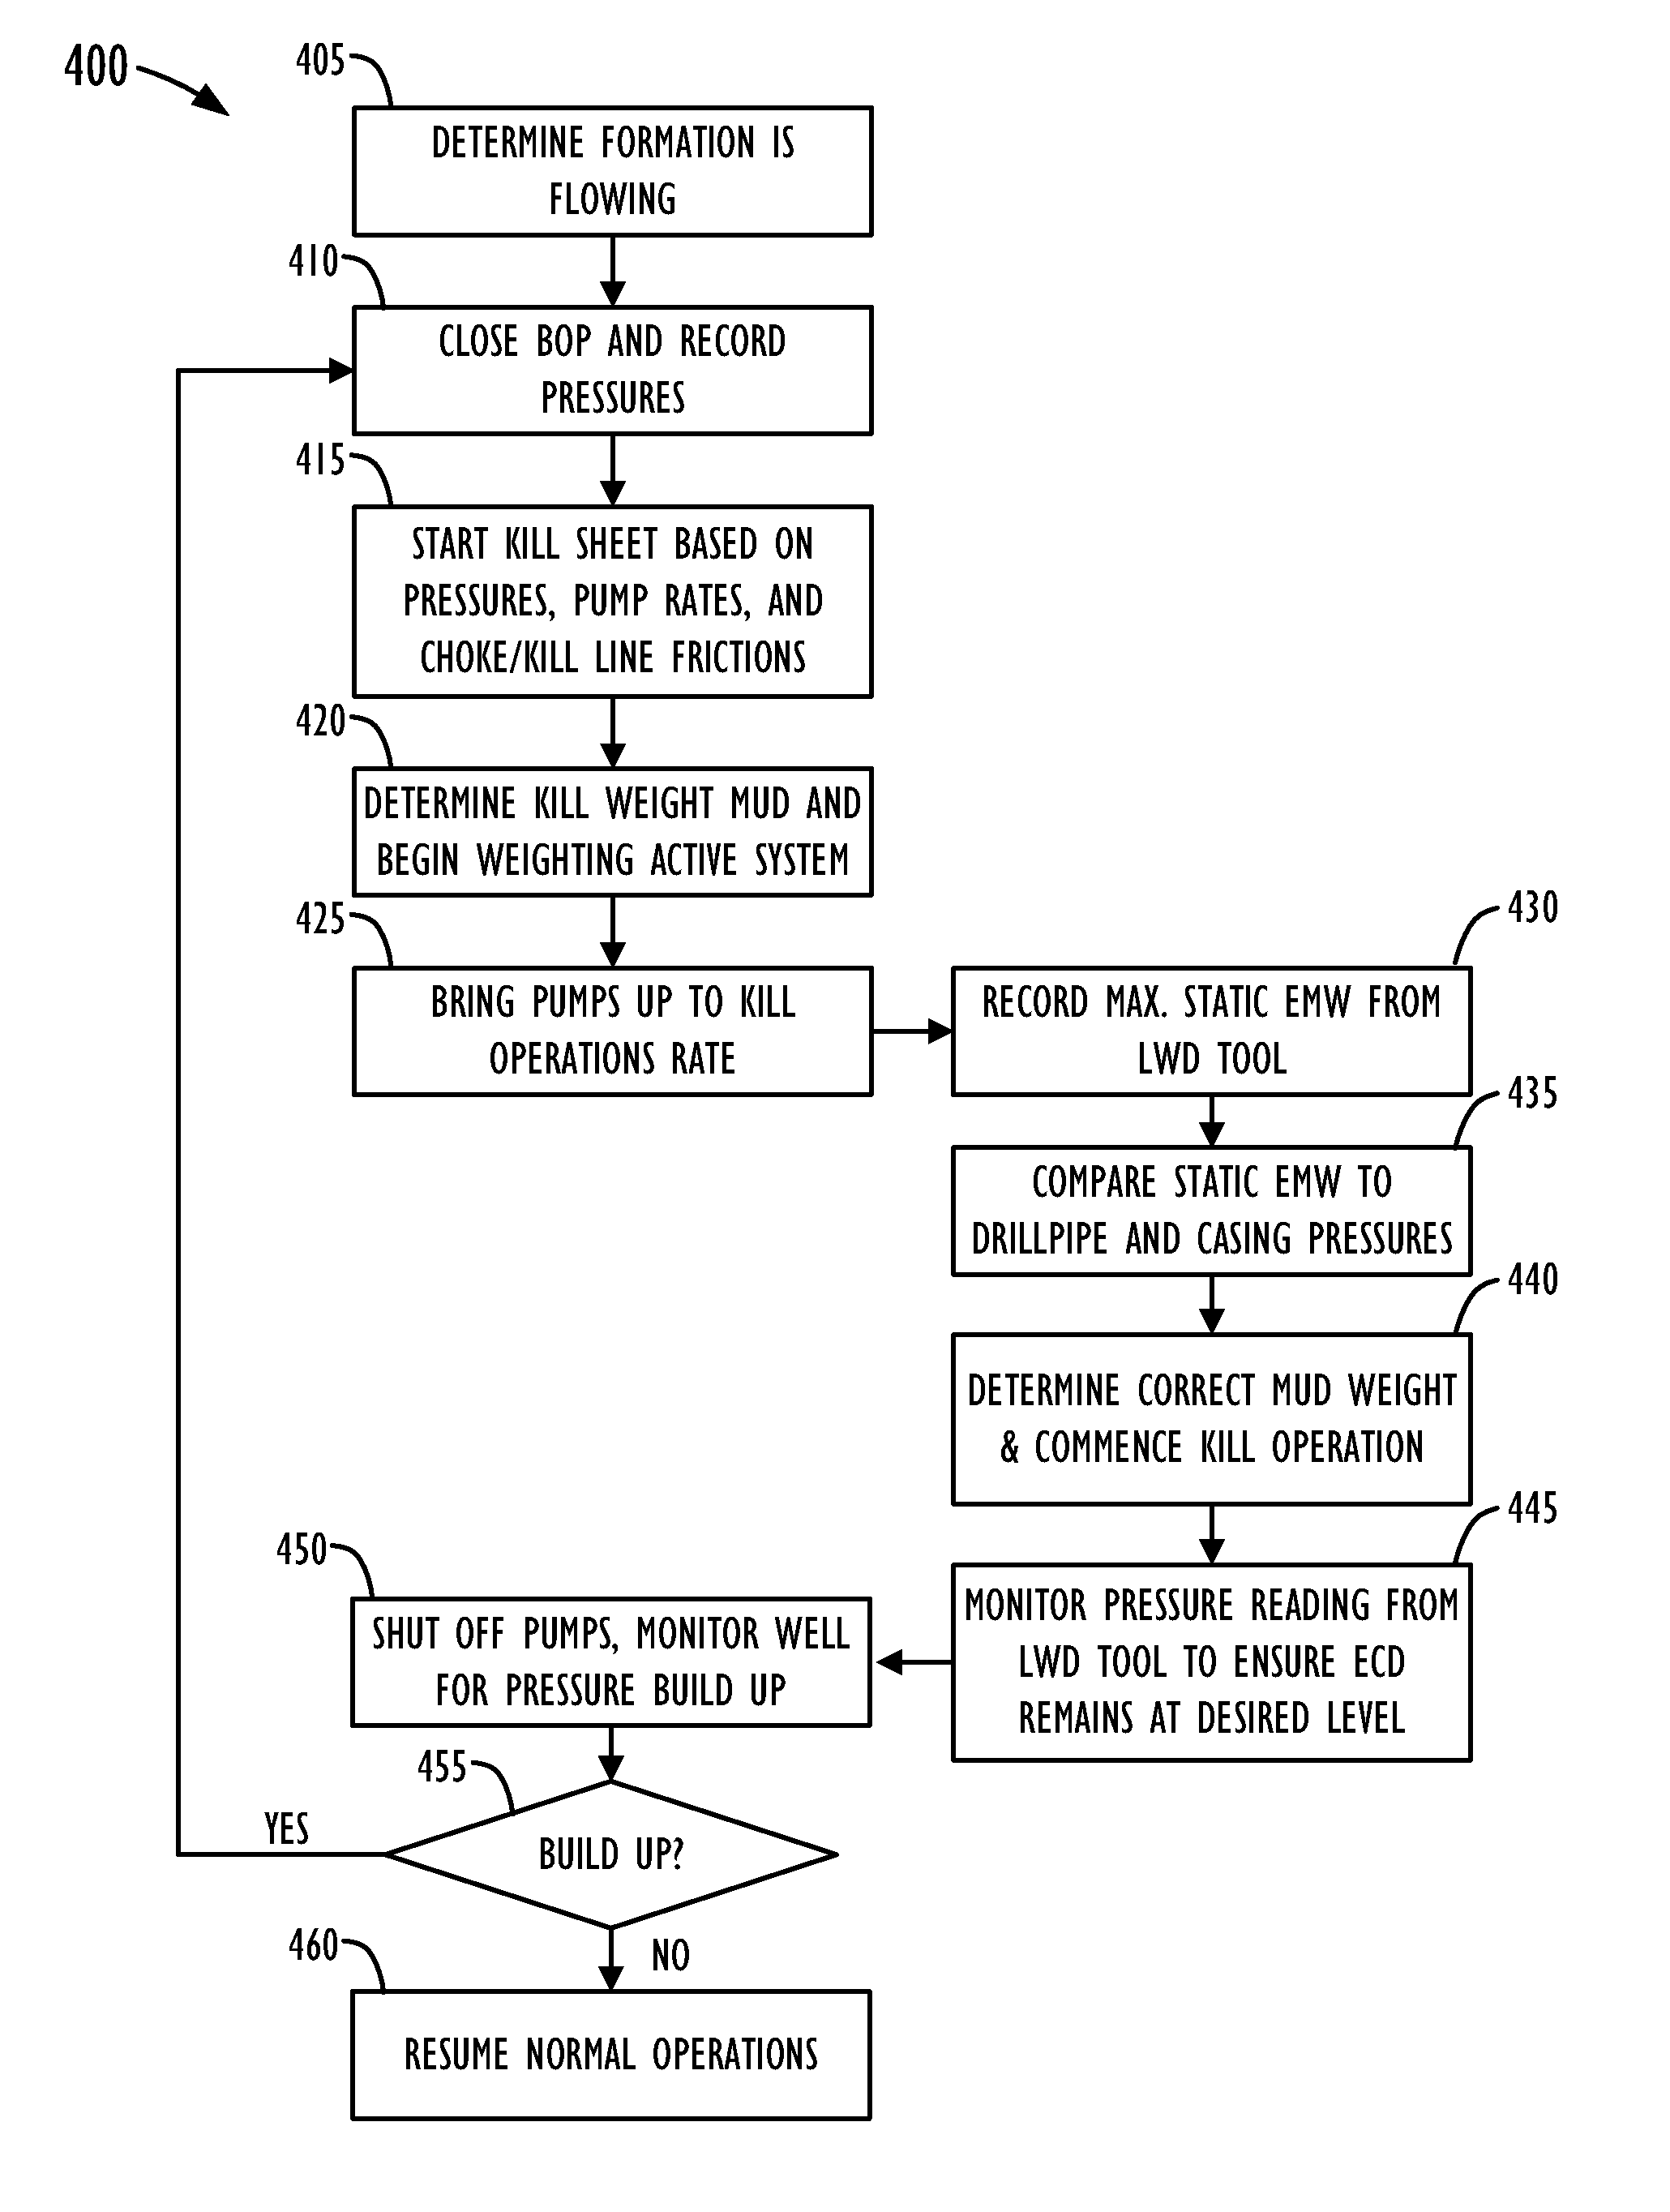 System and Method for Obtaining and Using Downhole Data During Well Control Operations